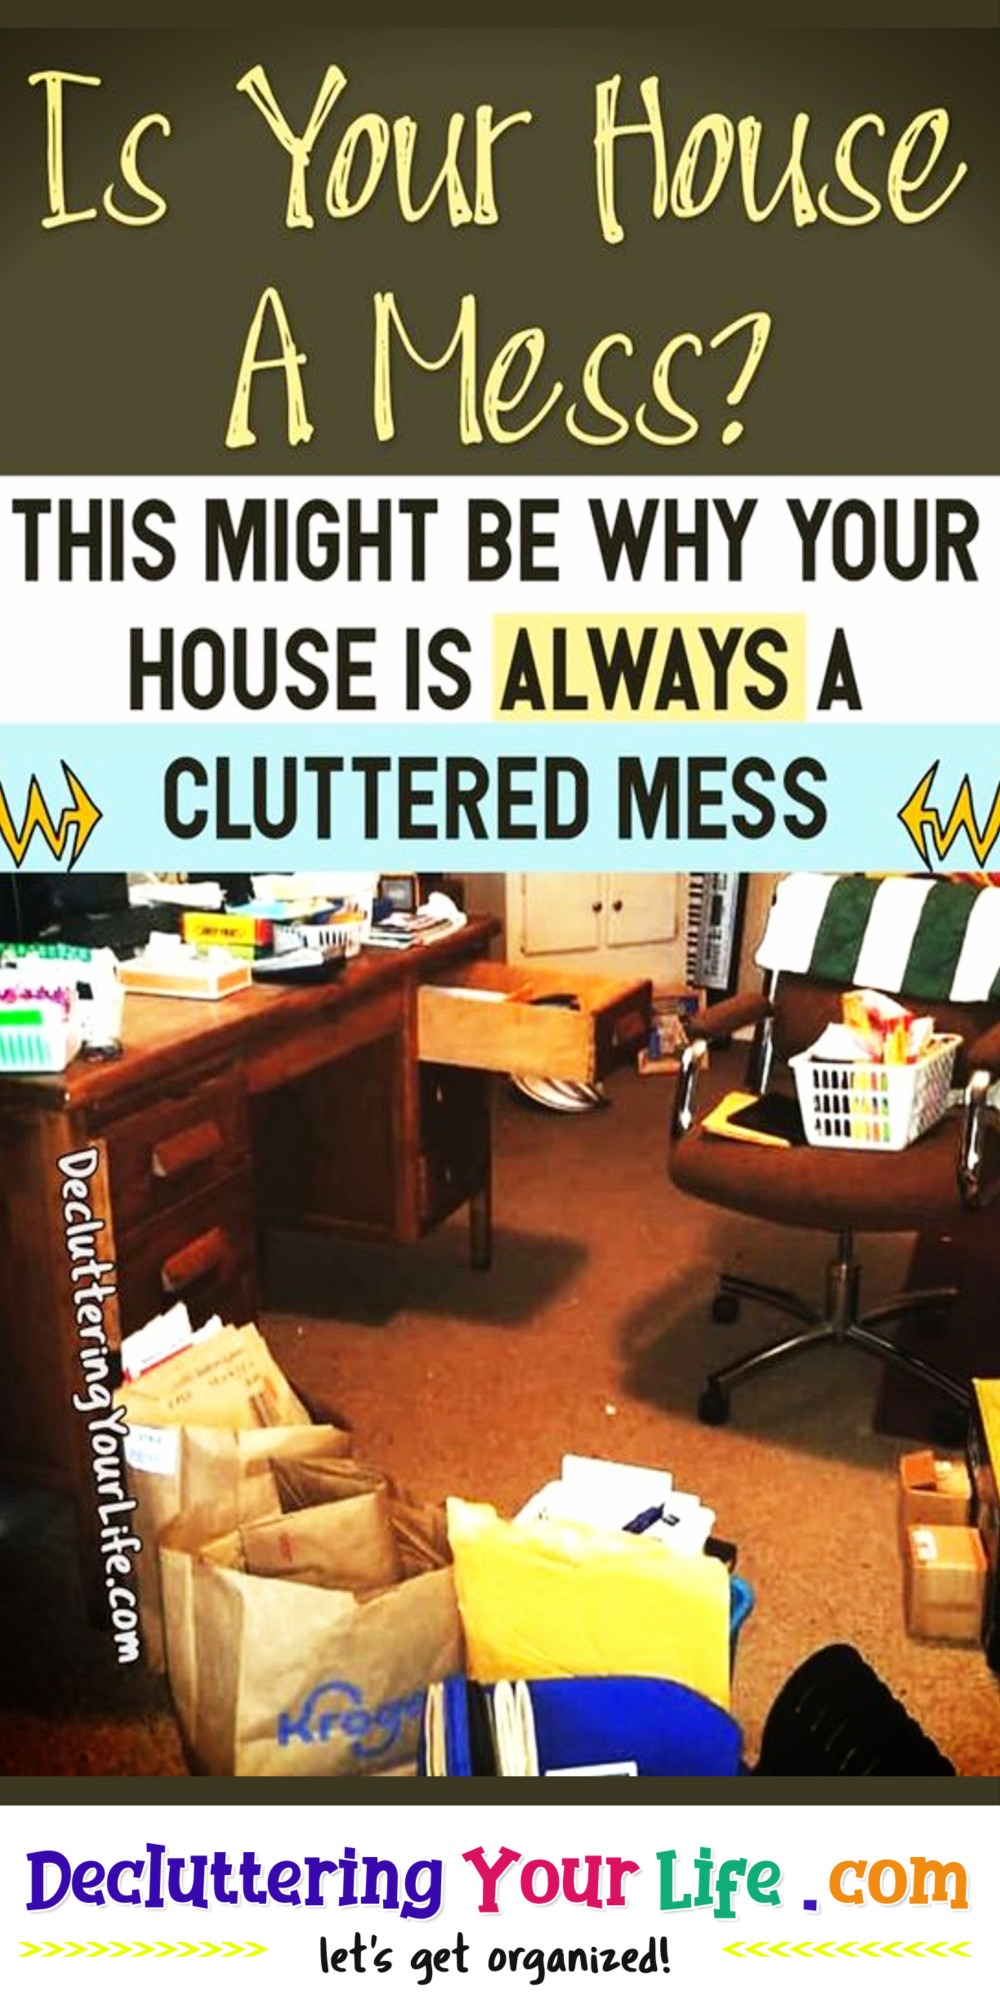 House ALWAYS a MESS? How to control clutter & where to start uncluttering your home - Go from cluttered mess to organized success with my Decluttering Club Declutter Challenge tips & inspiration to UNclutter your home without feeling overwhelmed or making decluttering mistakes